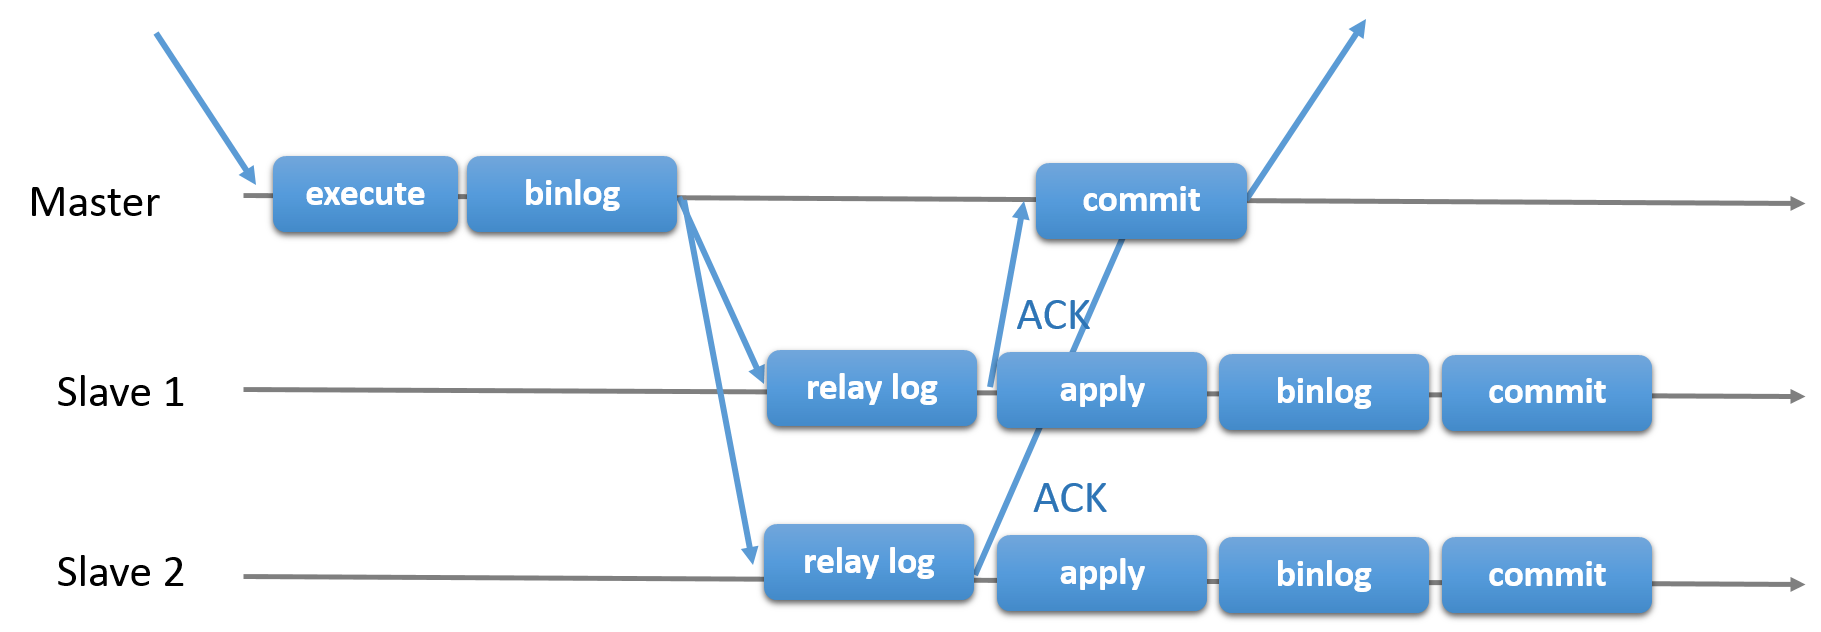 A transaction received by the master is executed and written to the binary log. The record from the binary log is sent to the relay logs on Slave 1 and Slave 2. The master then waits for an acknowledgement from the slaves. When both of the slaves have returned the acknowledgement, the master commits the transaction, and a response is sent to the client application. After each slave has returned its acknowlegement, it applies the transaction, writes it to the binary log, and commits it. The commit on the master depends on the acknowledgement from the slaves, but the commits on the slaves are independent from each other and from the commit on the master.